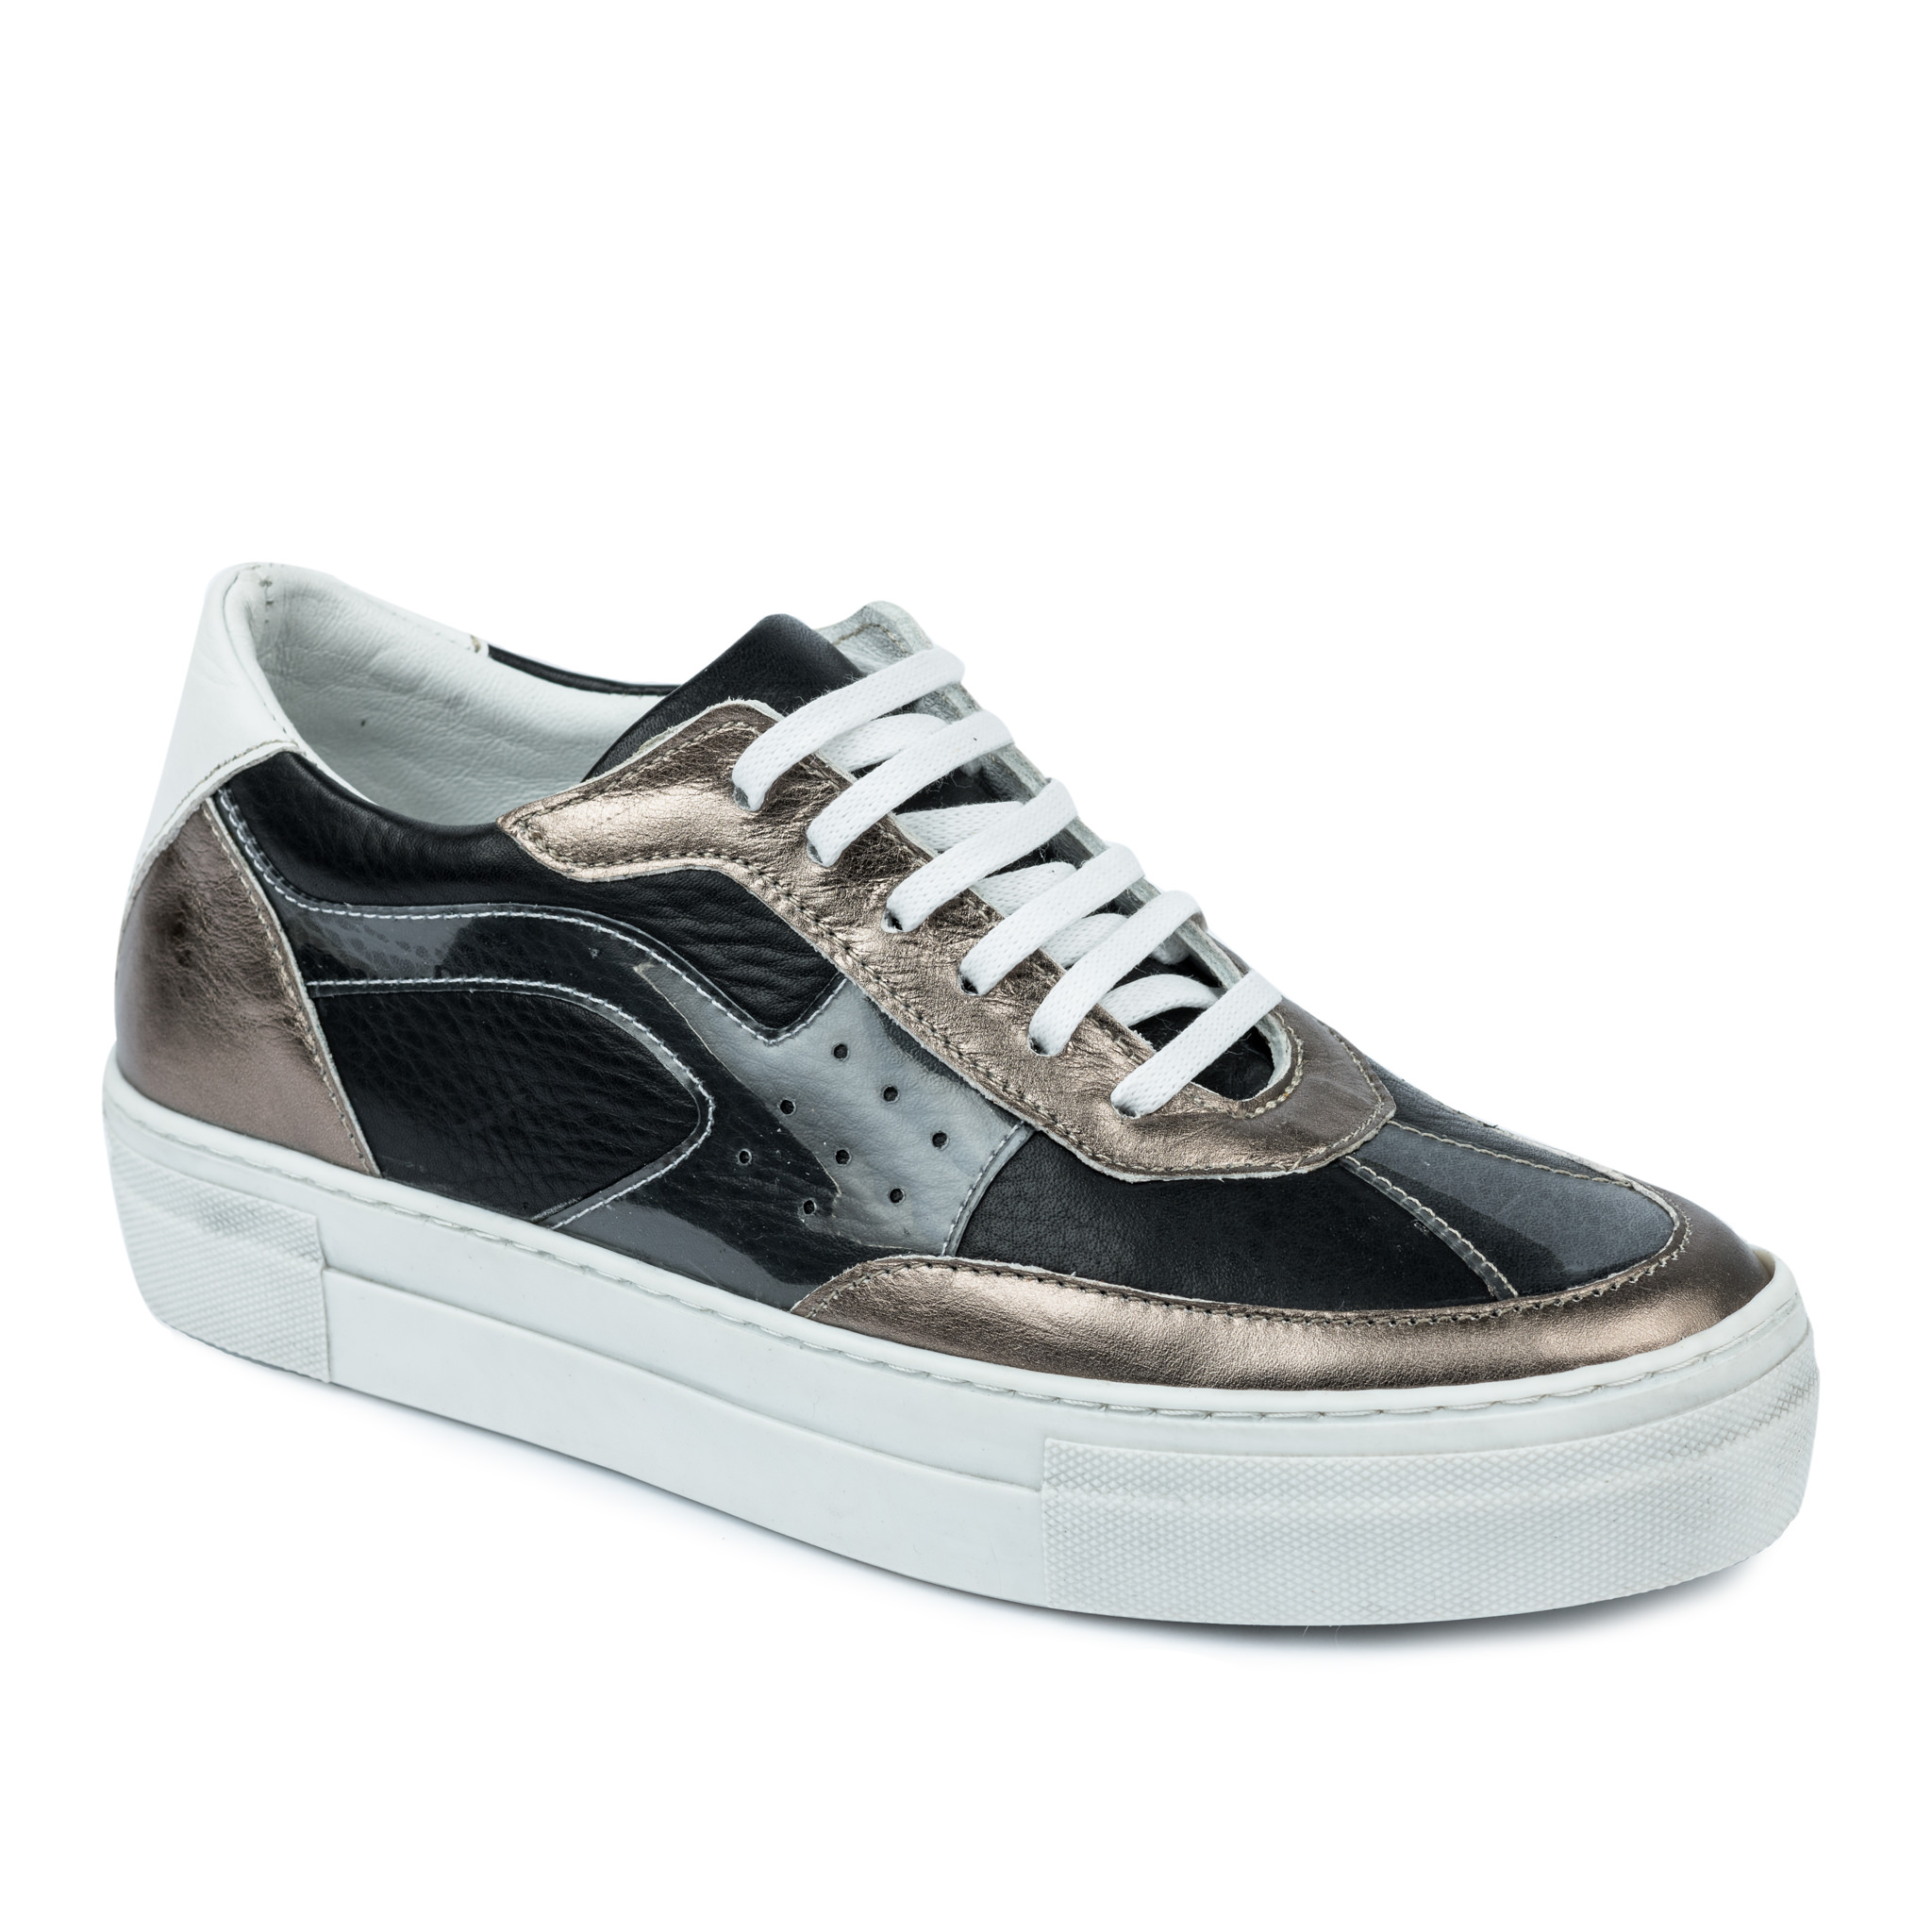 Leather sneakers A541 - GRAFIT